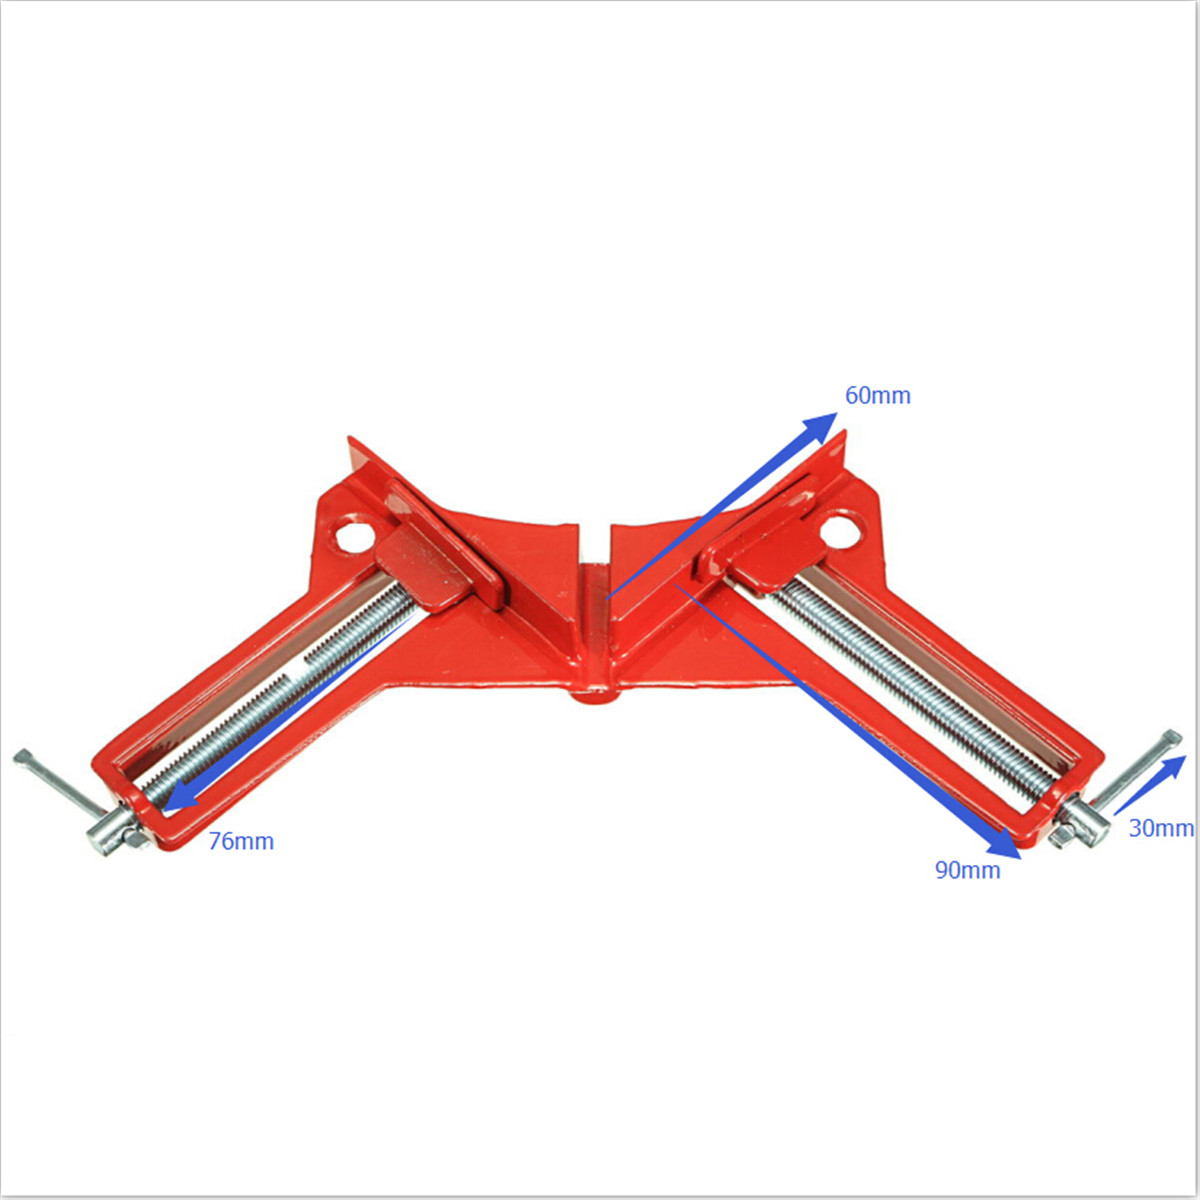 Raitooltrade-Multifunction-Right-Angle-Clip-90-Degree-Clamps-Corner-Holder-Wood-Working-Tool-1191136